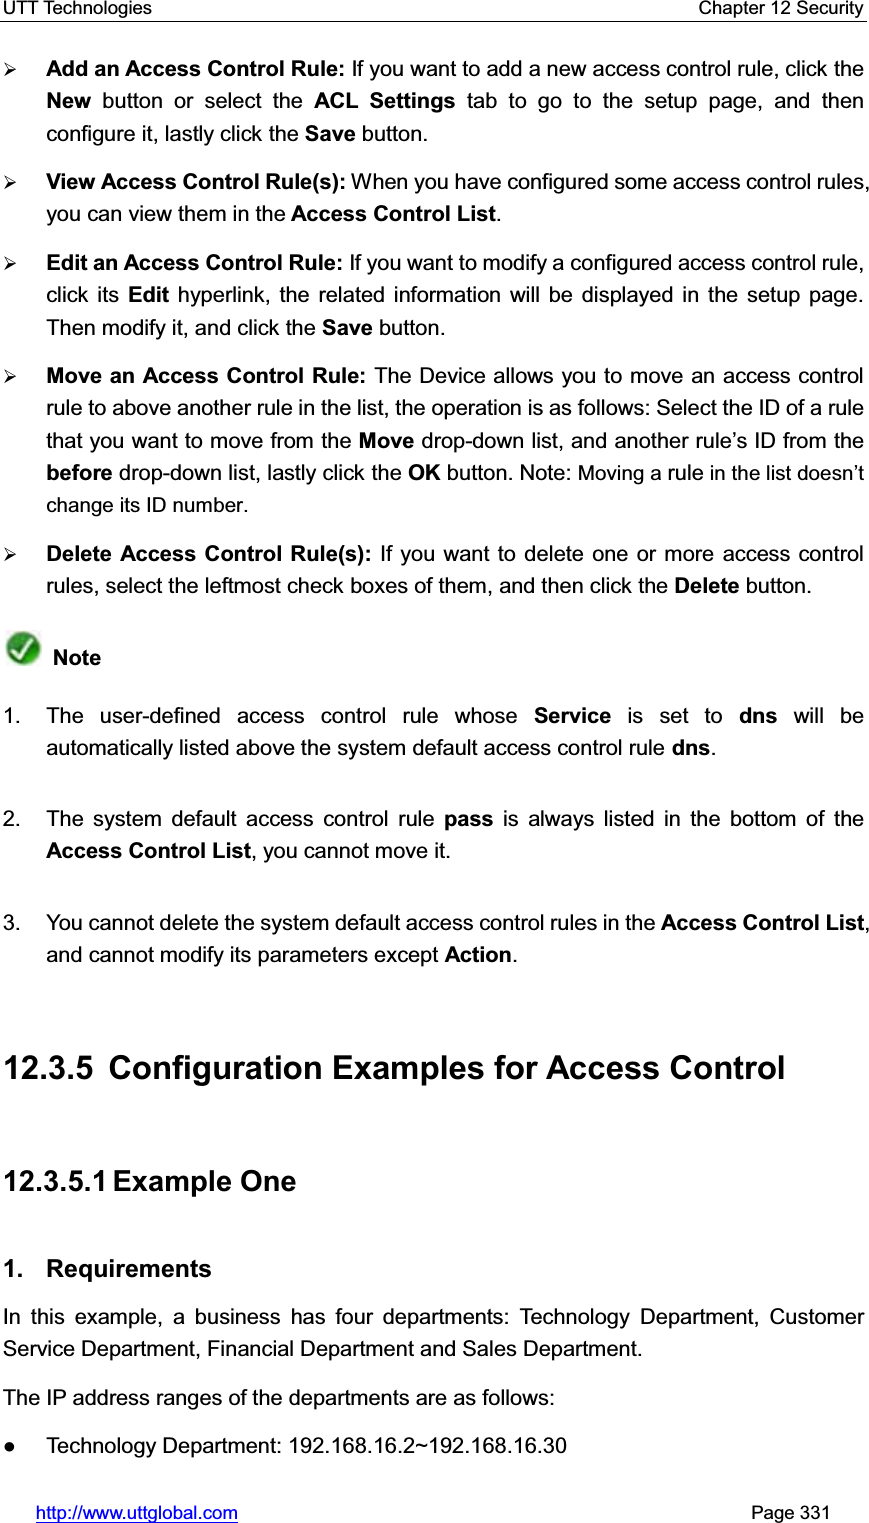 UTT Technologies    Chapter 12 Security   http://www.uttglobal.com                                                       Page 331 ¾Add an Access Control Rule: If you want to add a new access control rule, click theNew  button or select the ACL Settings tab to go to the setup page, and then configure it, lastly click the Save button. ¾View Access Control Rule(s): When you have configured some access control rules, you can view them in the Access Control List.¾Edit an Access Control Rule: If you want to modify a configured access control rule, click its Edit hyperlink, the related information will be displayed in the setup page. Then modify it, and click the Save button. ¾Move an Access Control Rule: The Device allows you to move an access control rule to above another rule in the list, the operation is as follows: Select the ID of a rule that you want to move from the Move drop-down list, and another rule¶s ID from thebefore drop-down list, lastly click the OK button. Note: Moving a rule in the list doesn¶Wchange its ID number.¾Delete Access Control Rule(s): If you want to delete one or more access control rules, select the leftmost check boxes of them, and then click the Delete button. Note1.  The user-defined access control rule whose Service is set to dns will be automatically listed above the system default access control rule dns.2.  The system default access control rule pass is always listed in the bottom of theAccess Control List, you cannot move it. 3.  You cannot delete the system default access control rules in the Access Control List,and cannot modify its parameters except Action.12.3.5 Configuration Examples for Access Control 12.3.5.1 Example One 1. Requirements In this example, a business has four departments: Technology Department, Customer Service Department, Financial Department and Sales Department. The IP address ranges of the departments are as follows: Ɣ Technology Department: 192.168.16.2~192.168.16.30 